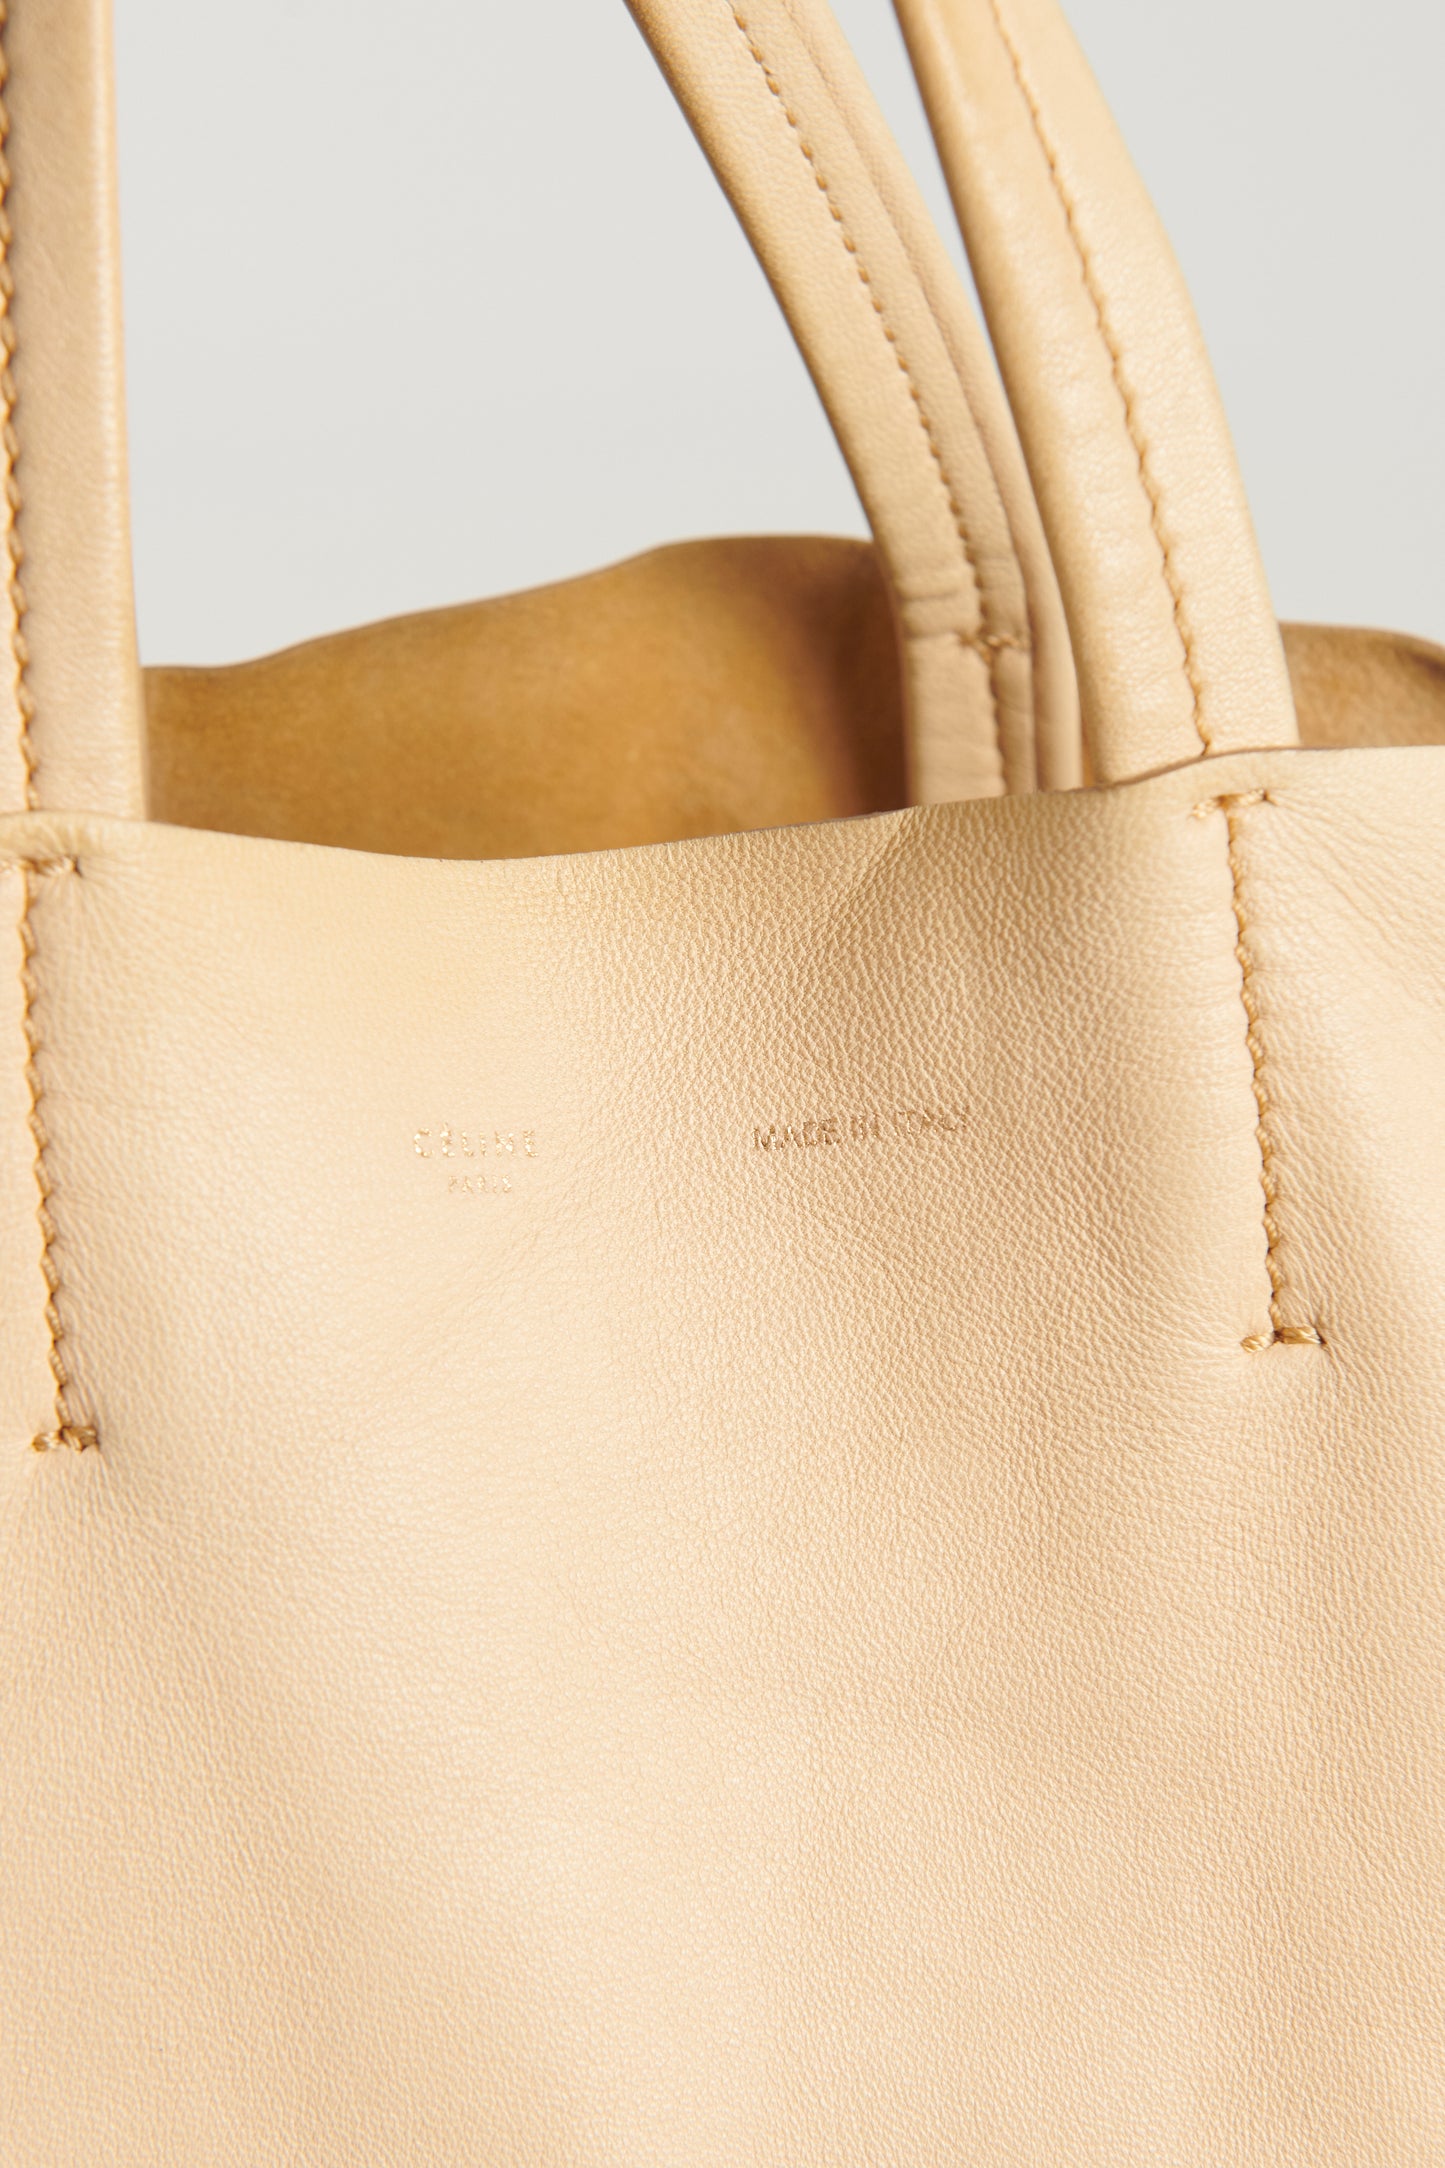 2010 Beige and Leather Preowned Colour block Cabas Tote